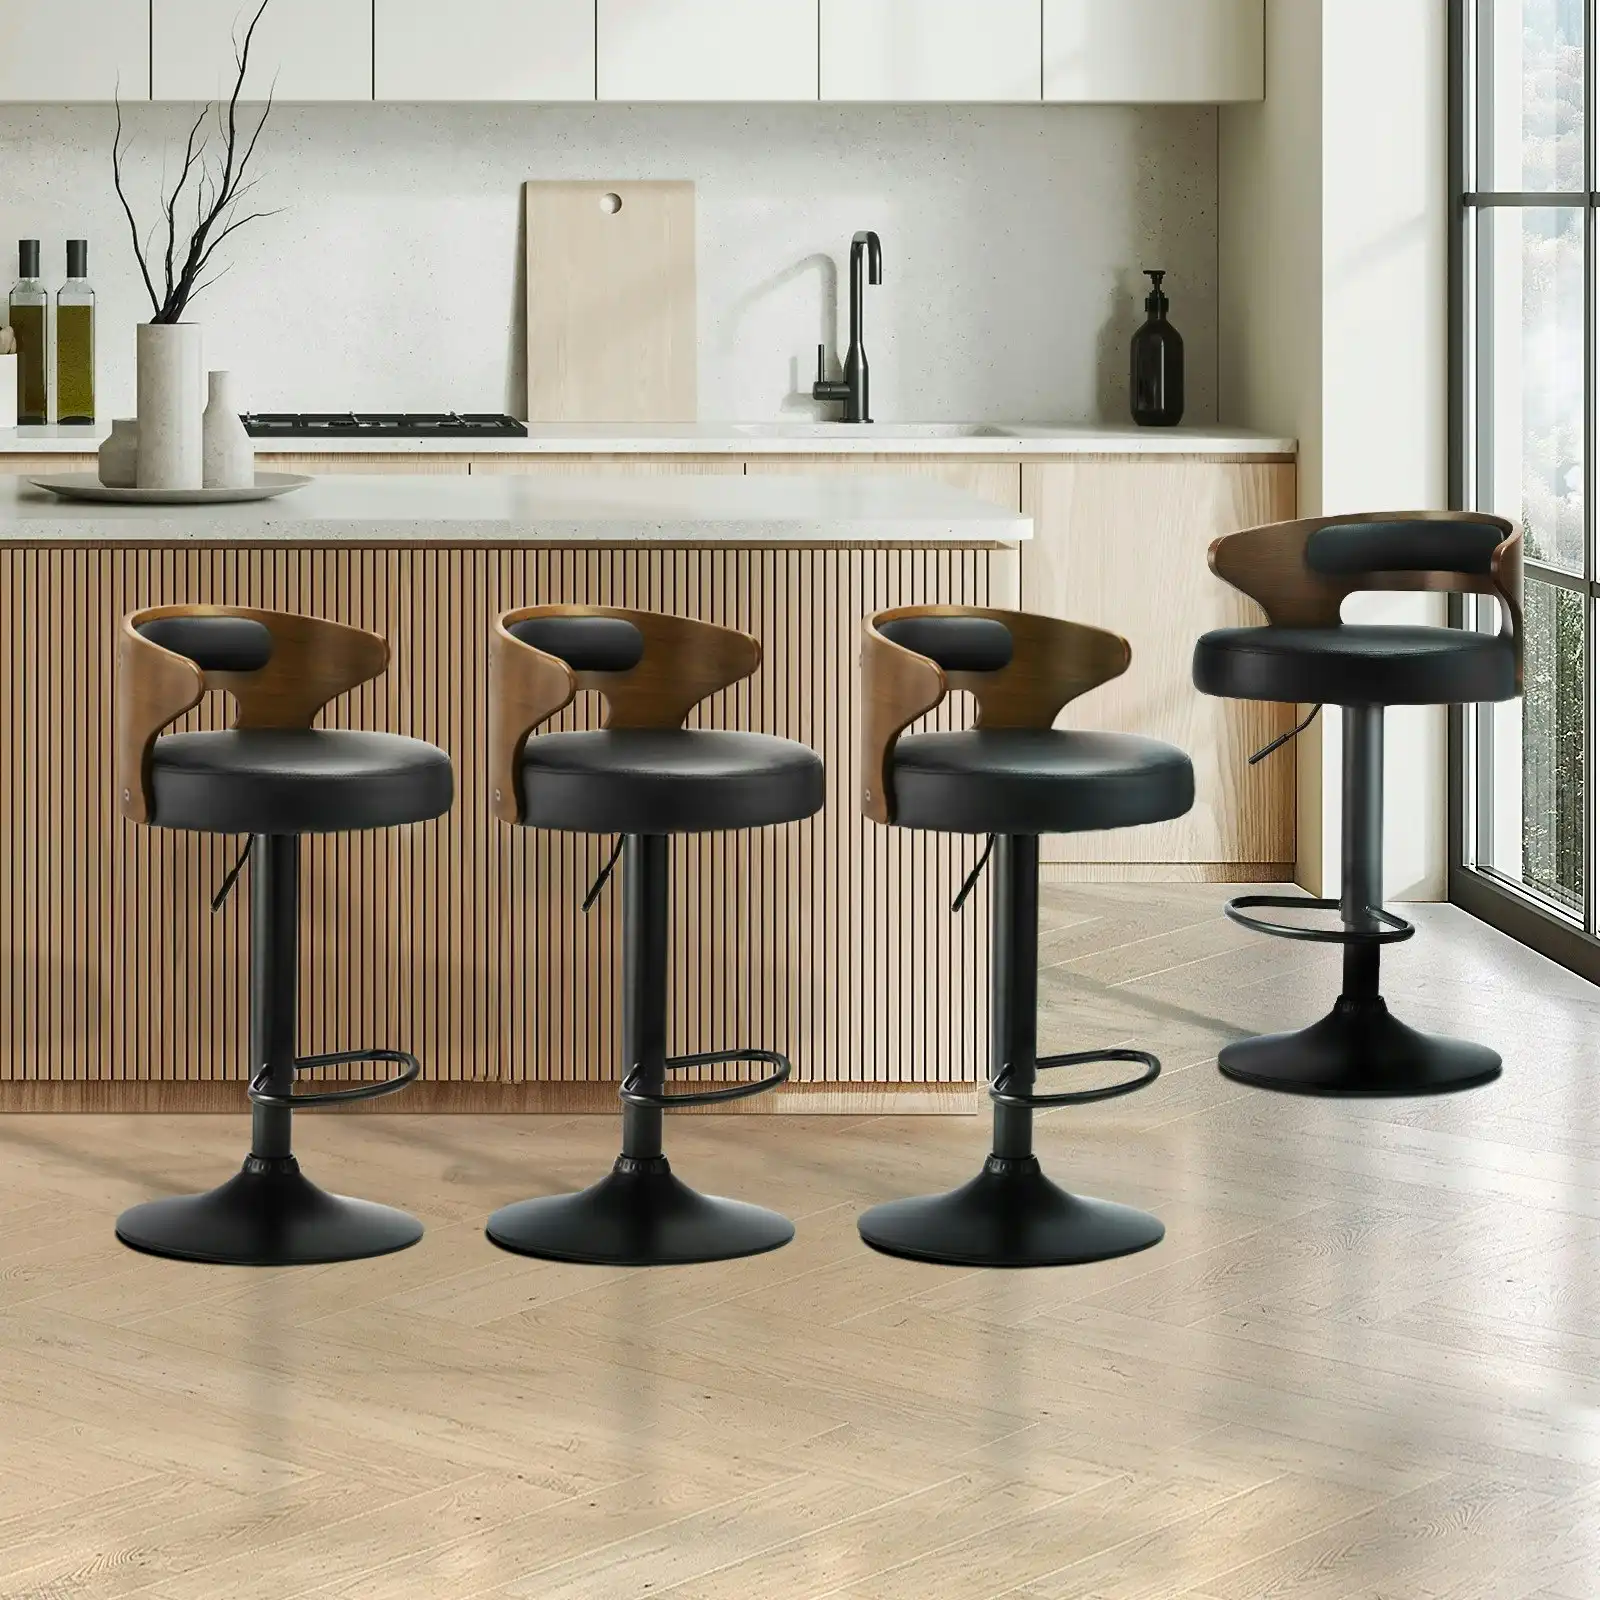 Oikiture 4x Bar Stools Kitchen Gas Lift Swivel Chairs Stool Wooden Barstool Black